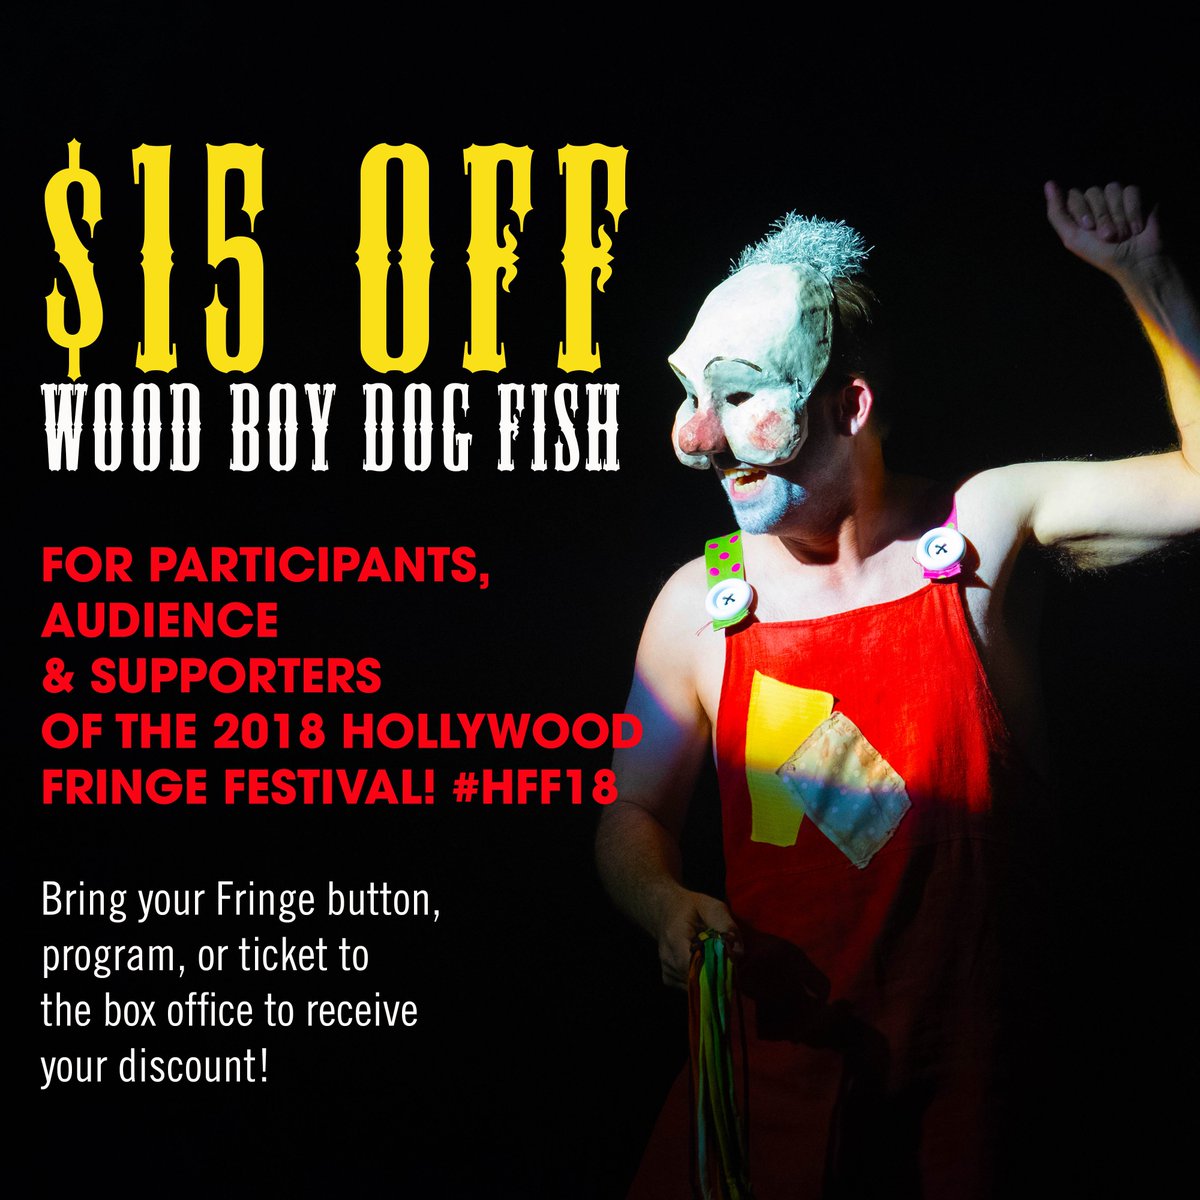 We were a past @hollywoodfringe participant, so we wanted to extend a discount for #WoodBoyDogFish to all Fringe participants, supporters, & audiences! Just bring your button/program/ticket to the box office and get $15 off! Or use code HFF15 online: bit.ly/2JJPpVi